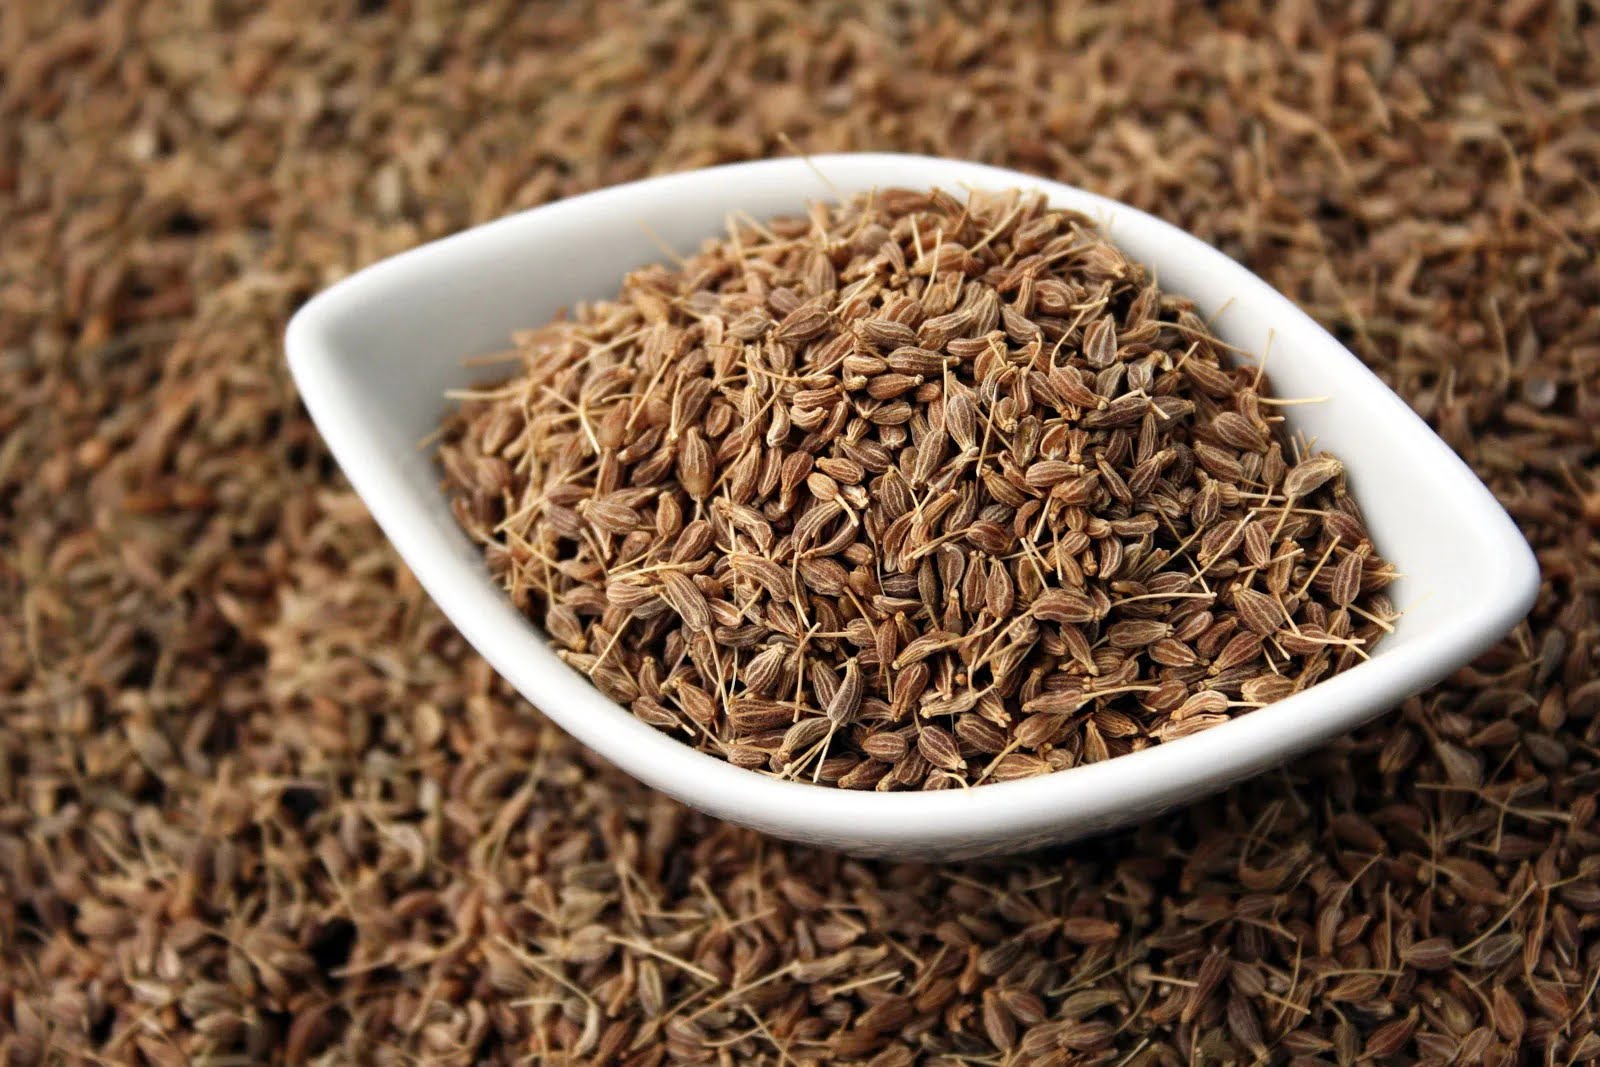 How To Use Anise Seed